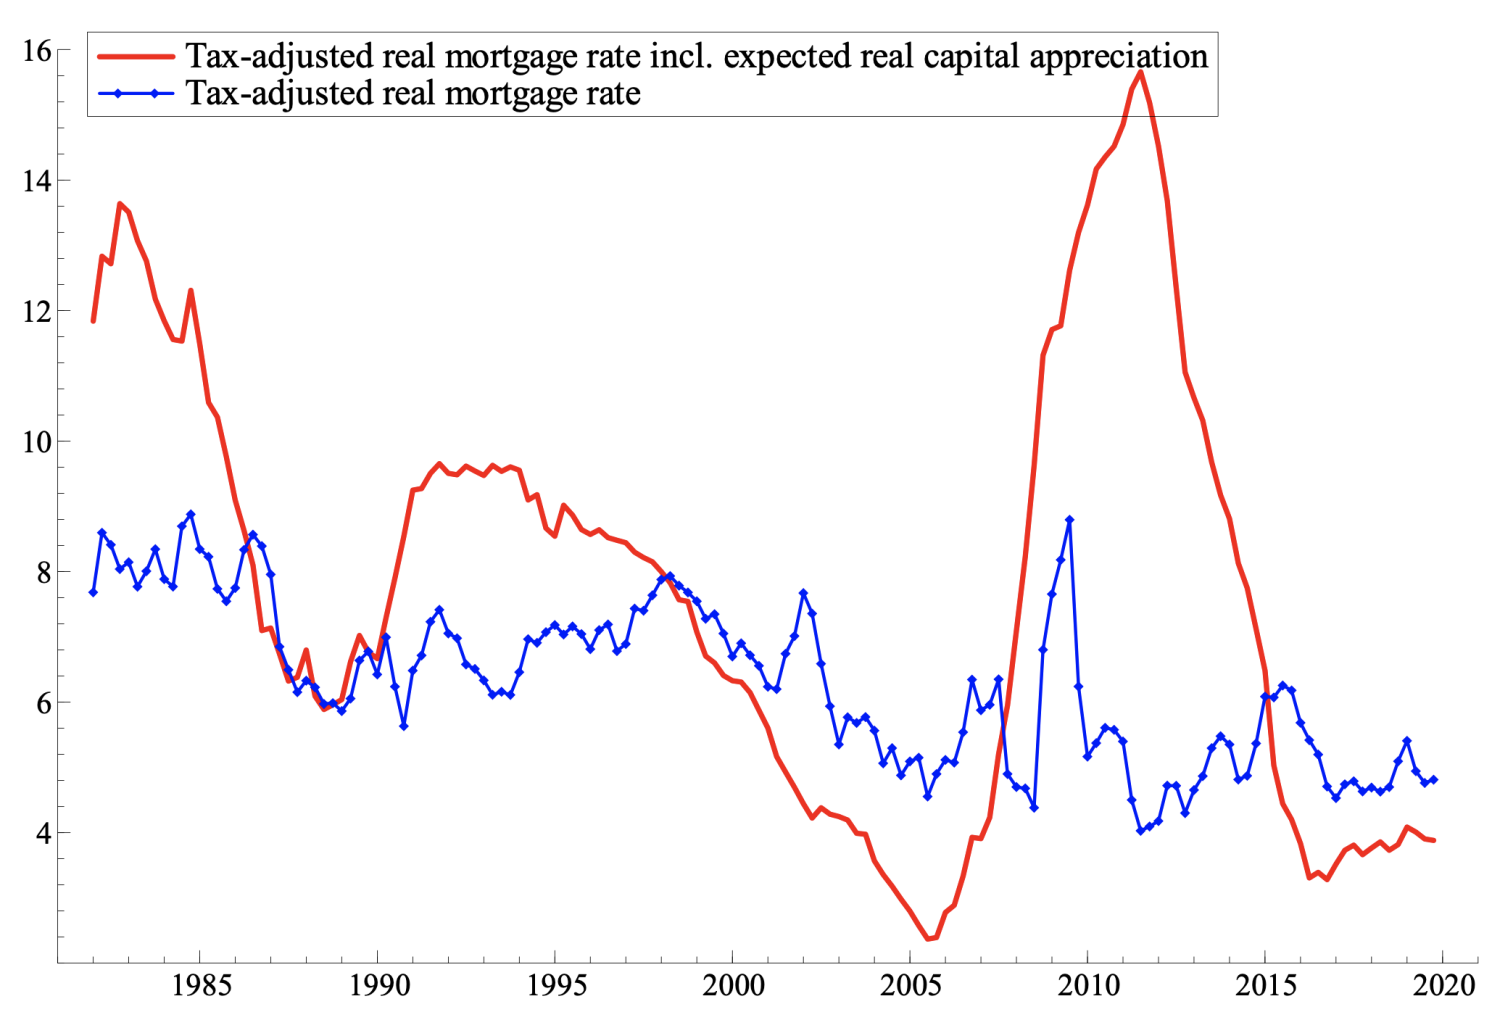 Figure 2 Tax-adjusted real mortgage interest rate for the US with and without expected real capital gains